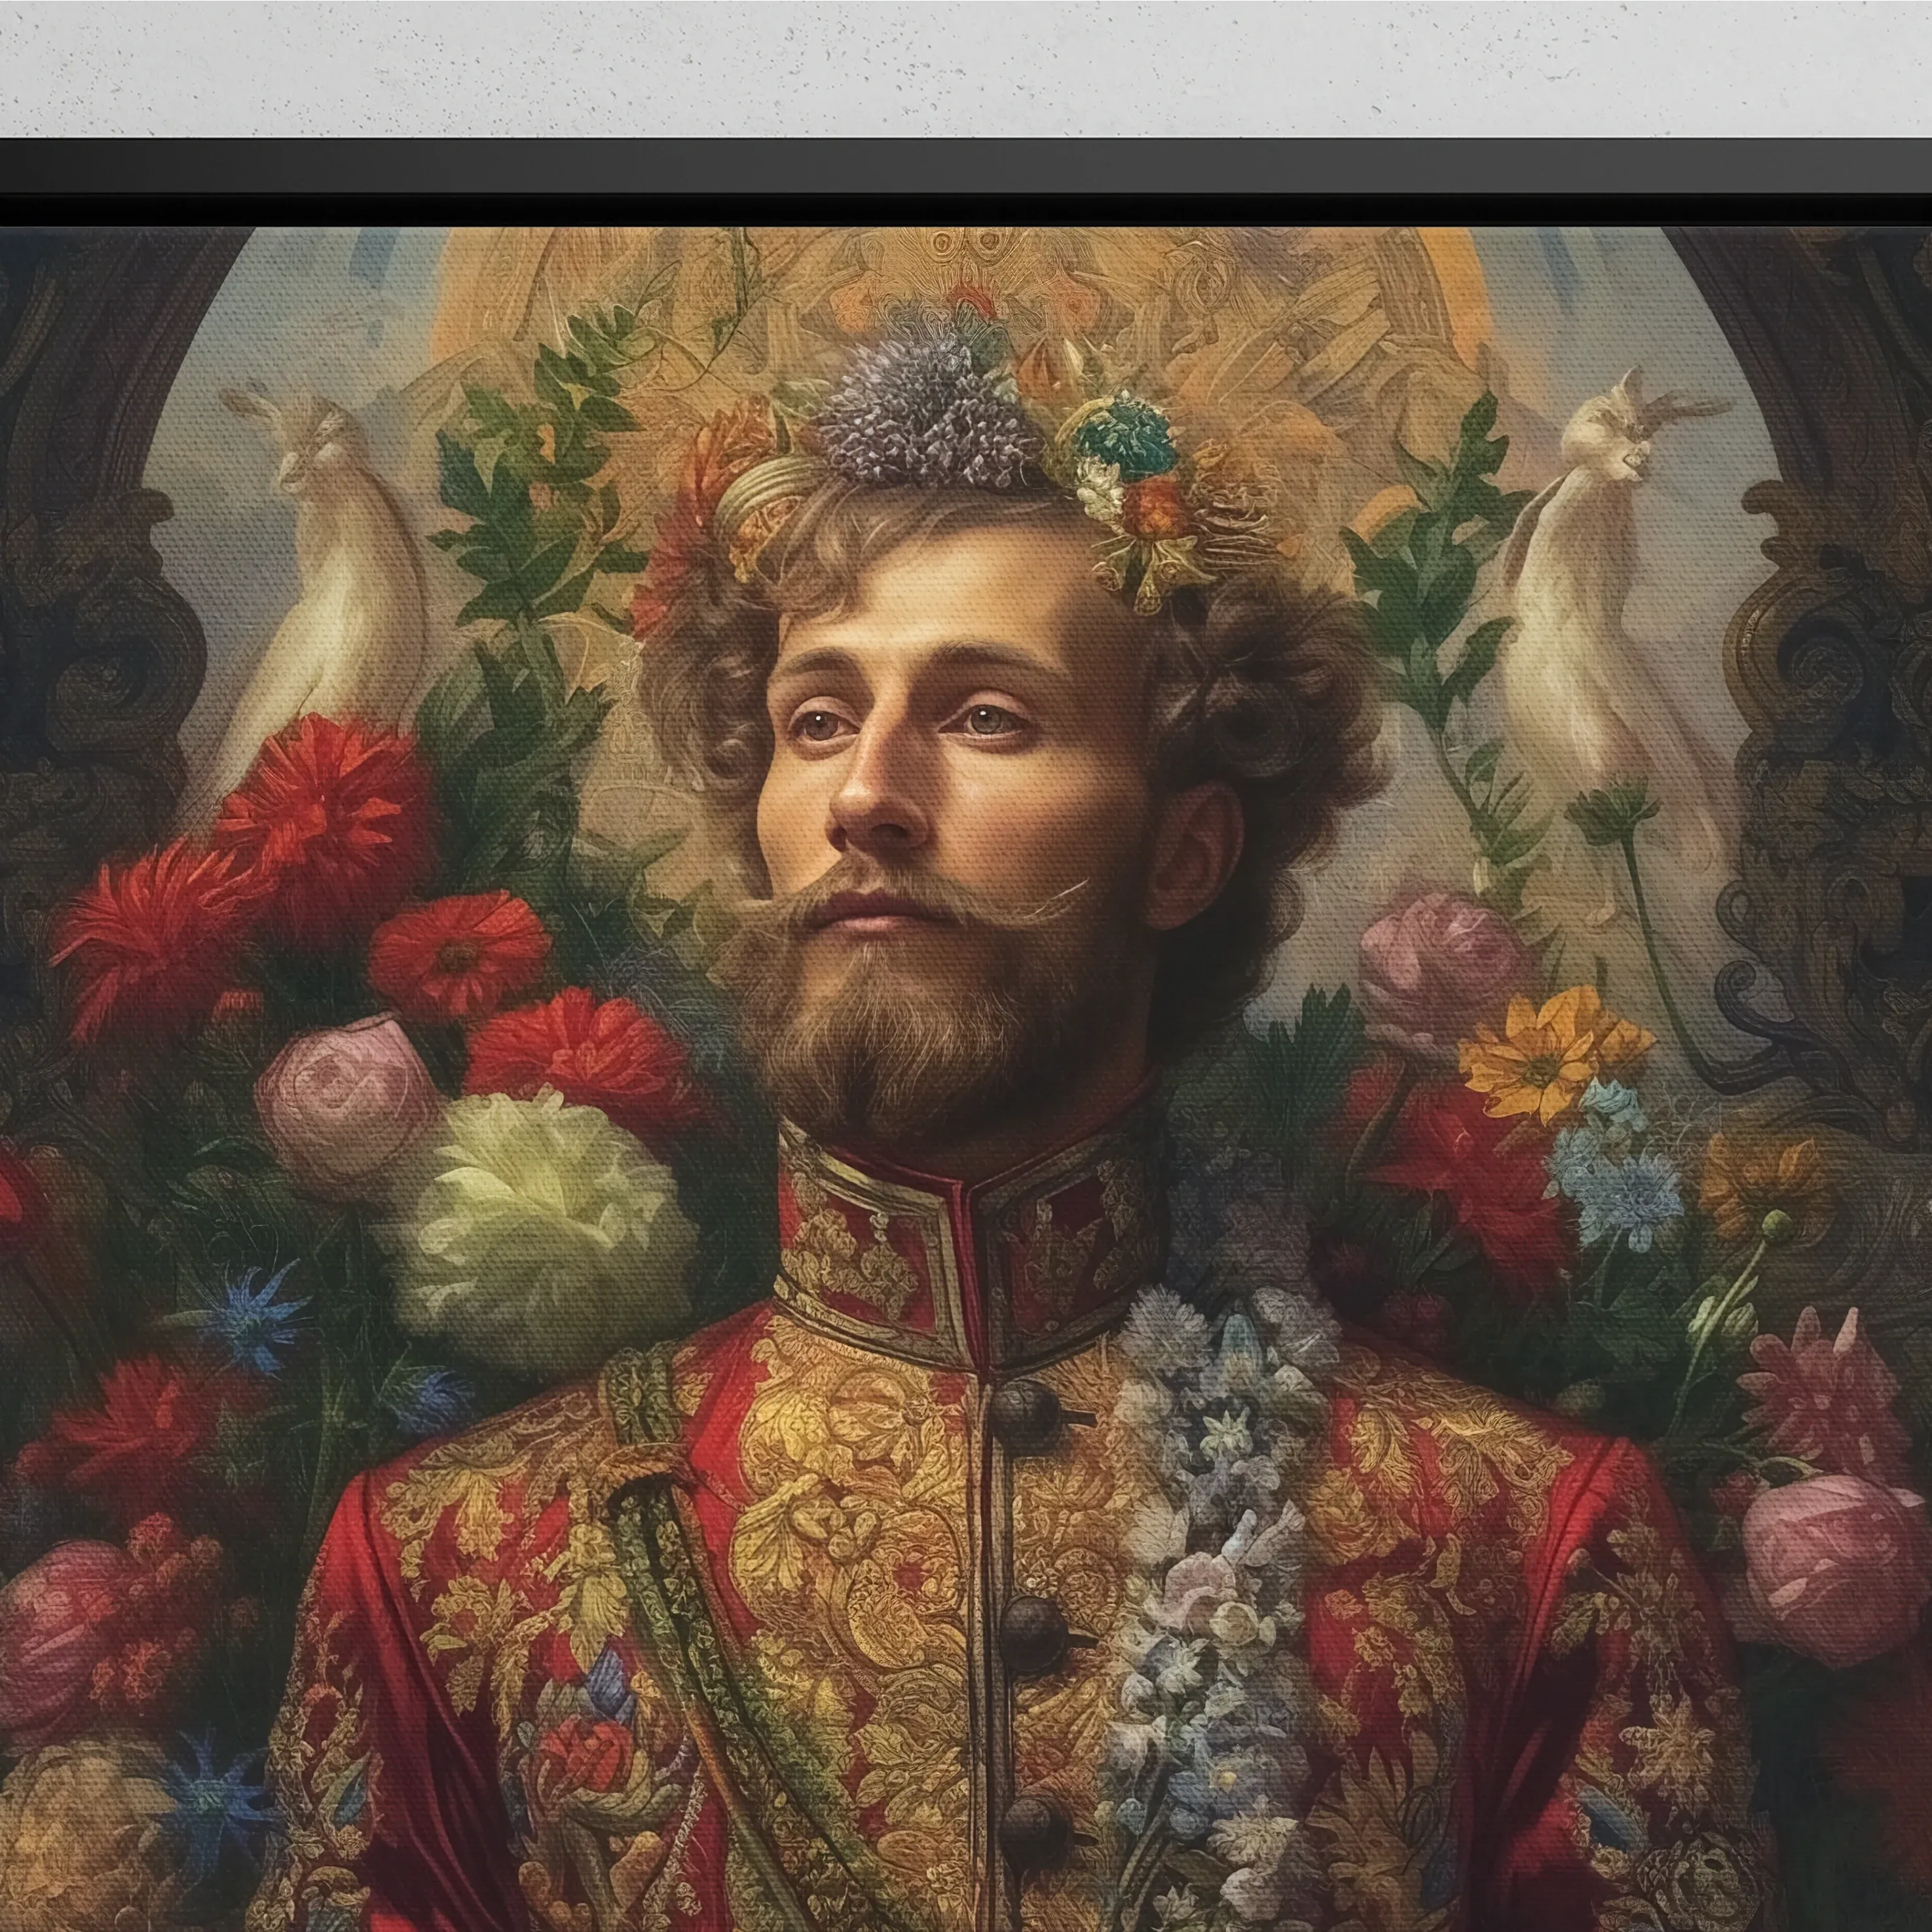 Prince Fyodor - Gay Russian Royalty Queerart Framed Canvas - Posters Prints & Visual Artwork - Aesthetic Art